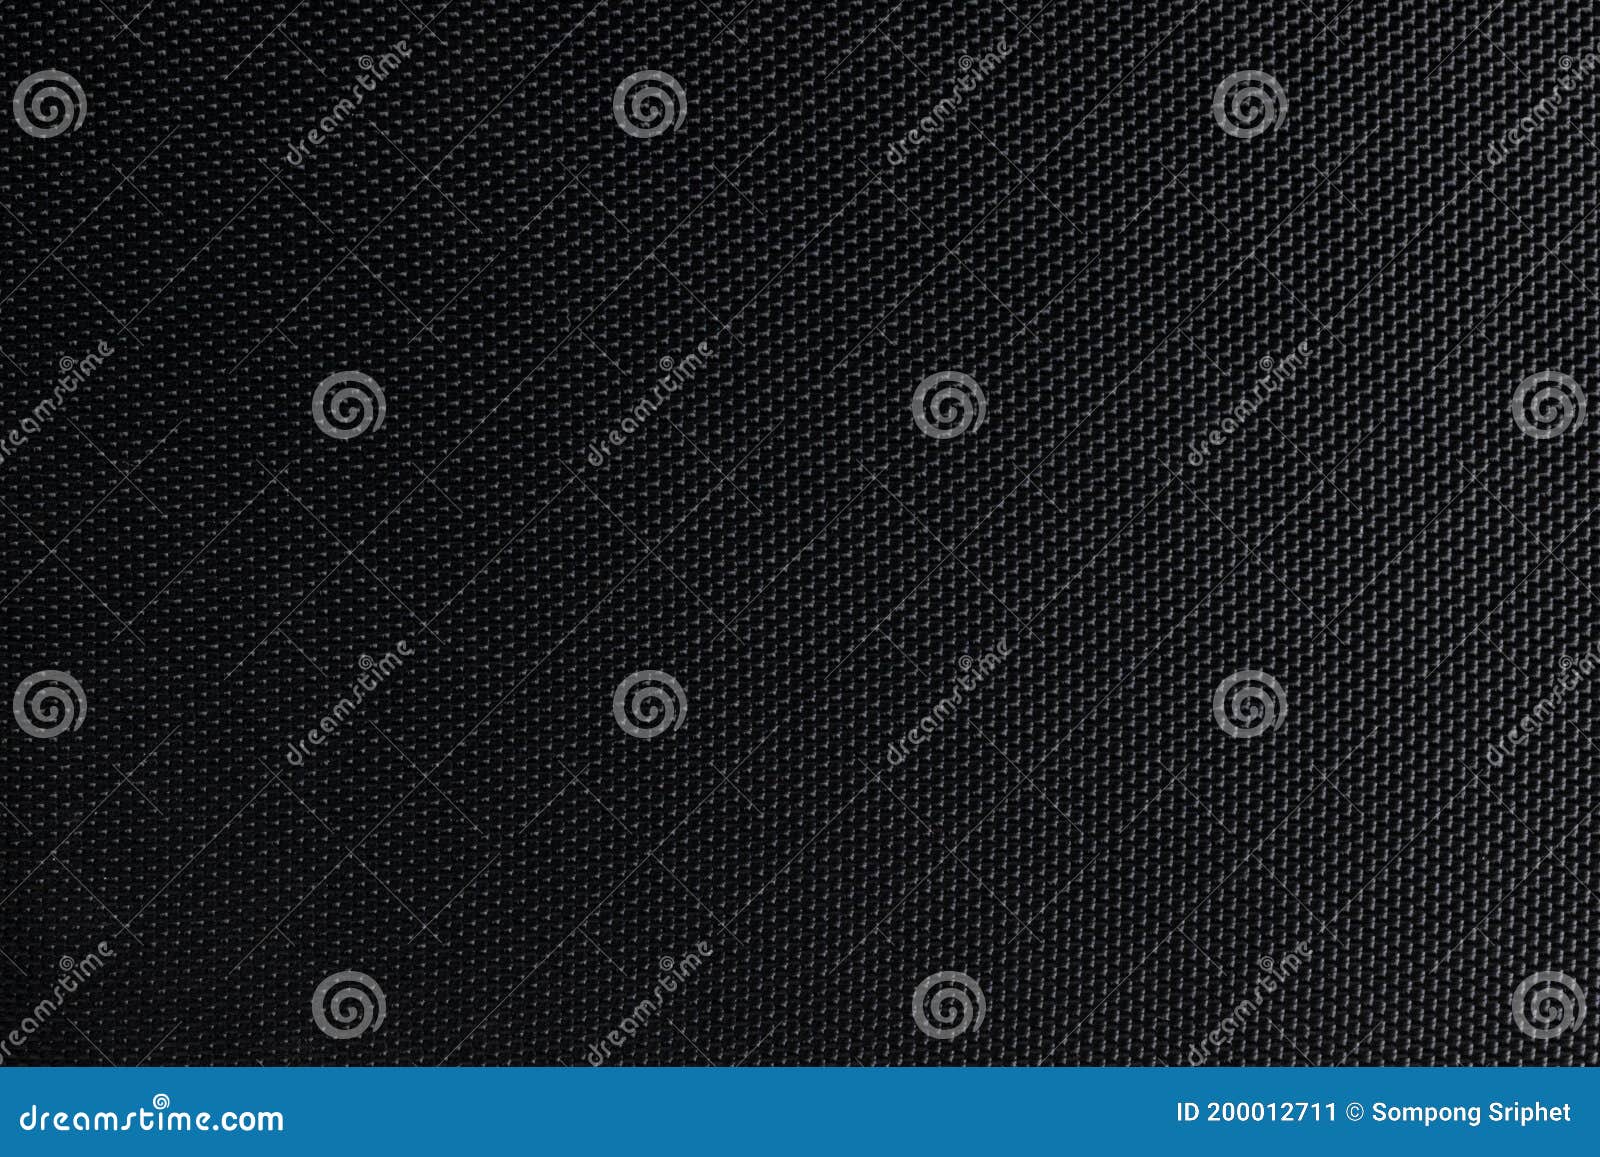 Abstract Background Dark Black or Texture Stock Image - Image of grungy